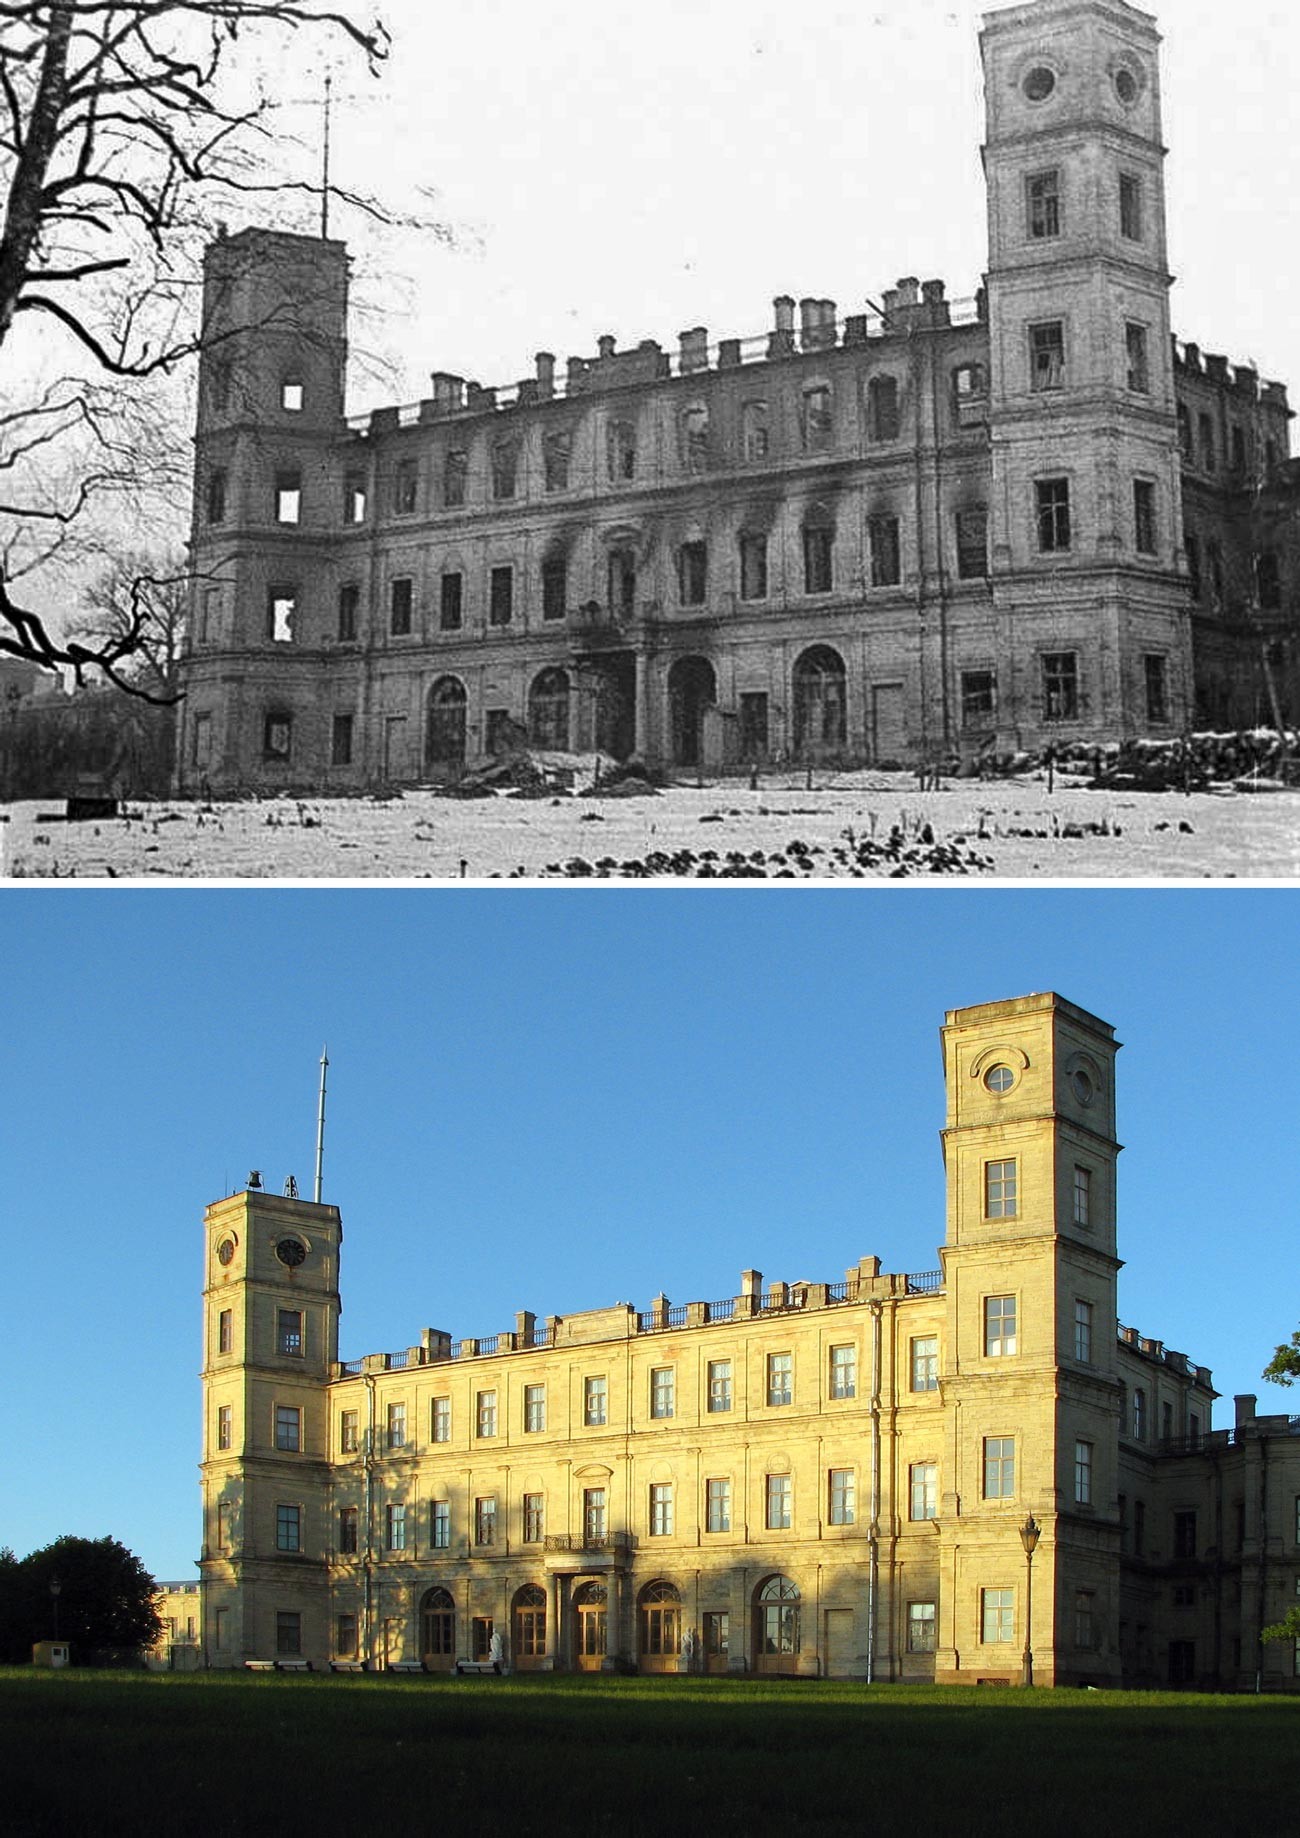 The northern façade of the palace in 1944 and now